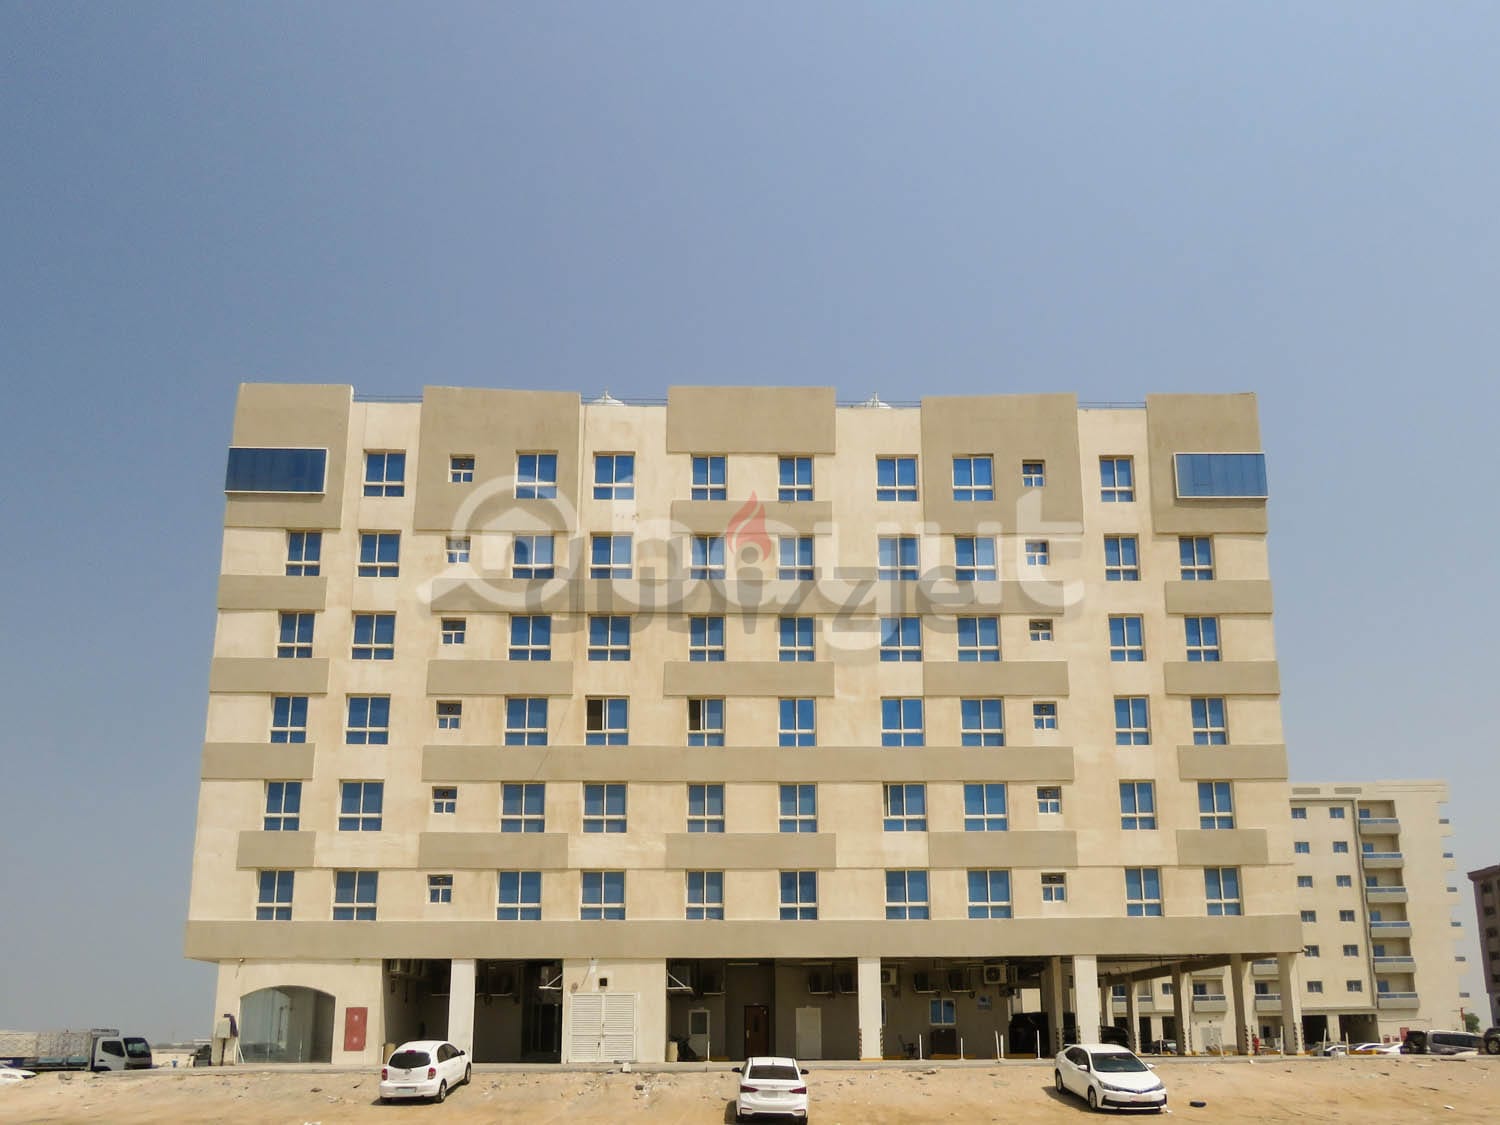 Studio, 1 And 2 Bhk Apartments For Rent At Umm Al Quwain, Direct From Owner, No Commission, New Bui